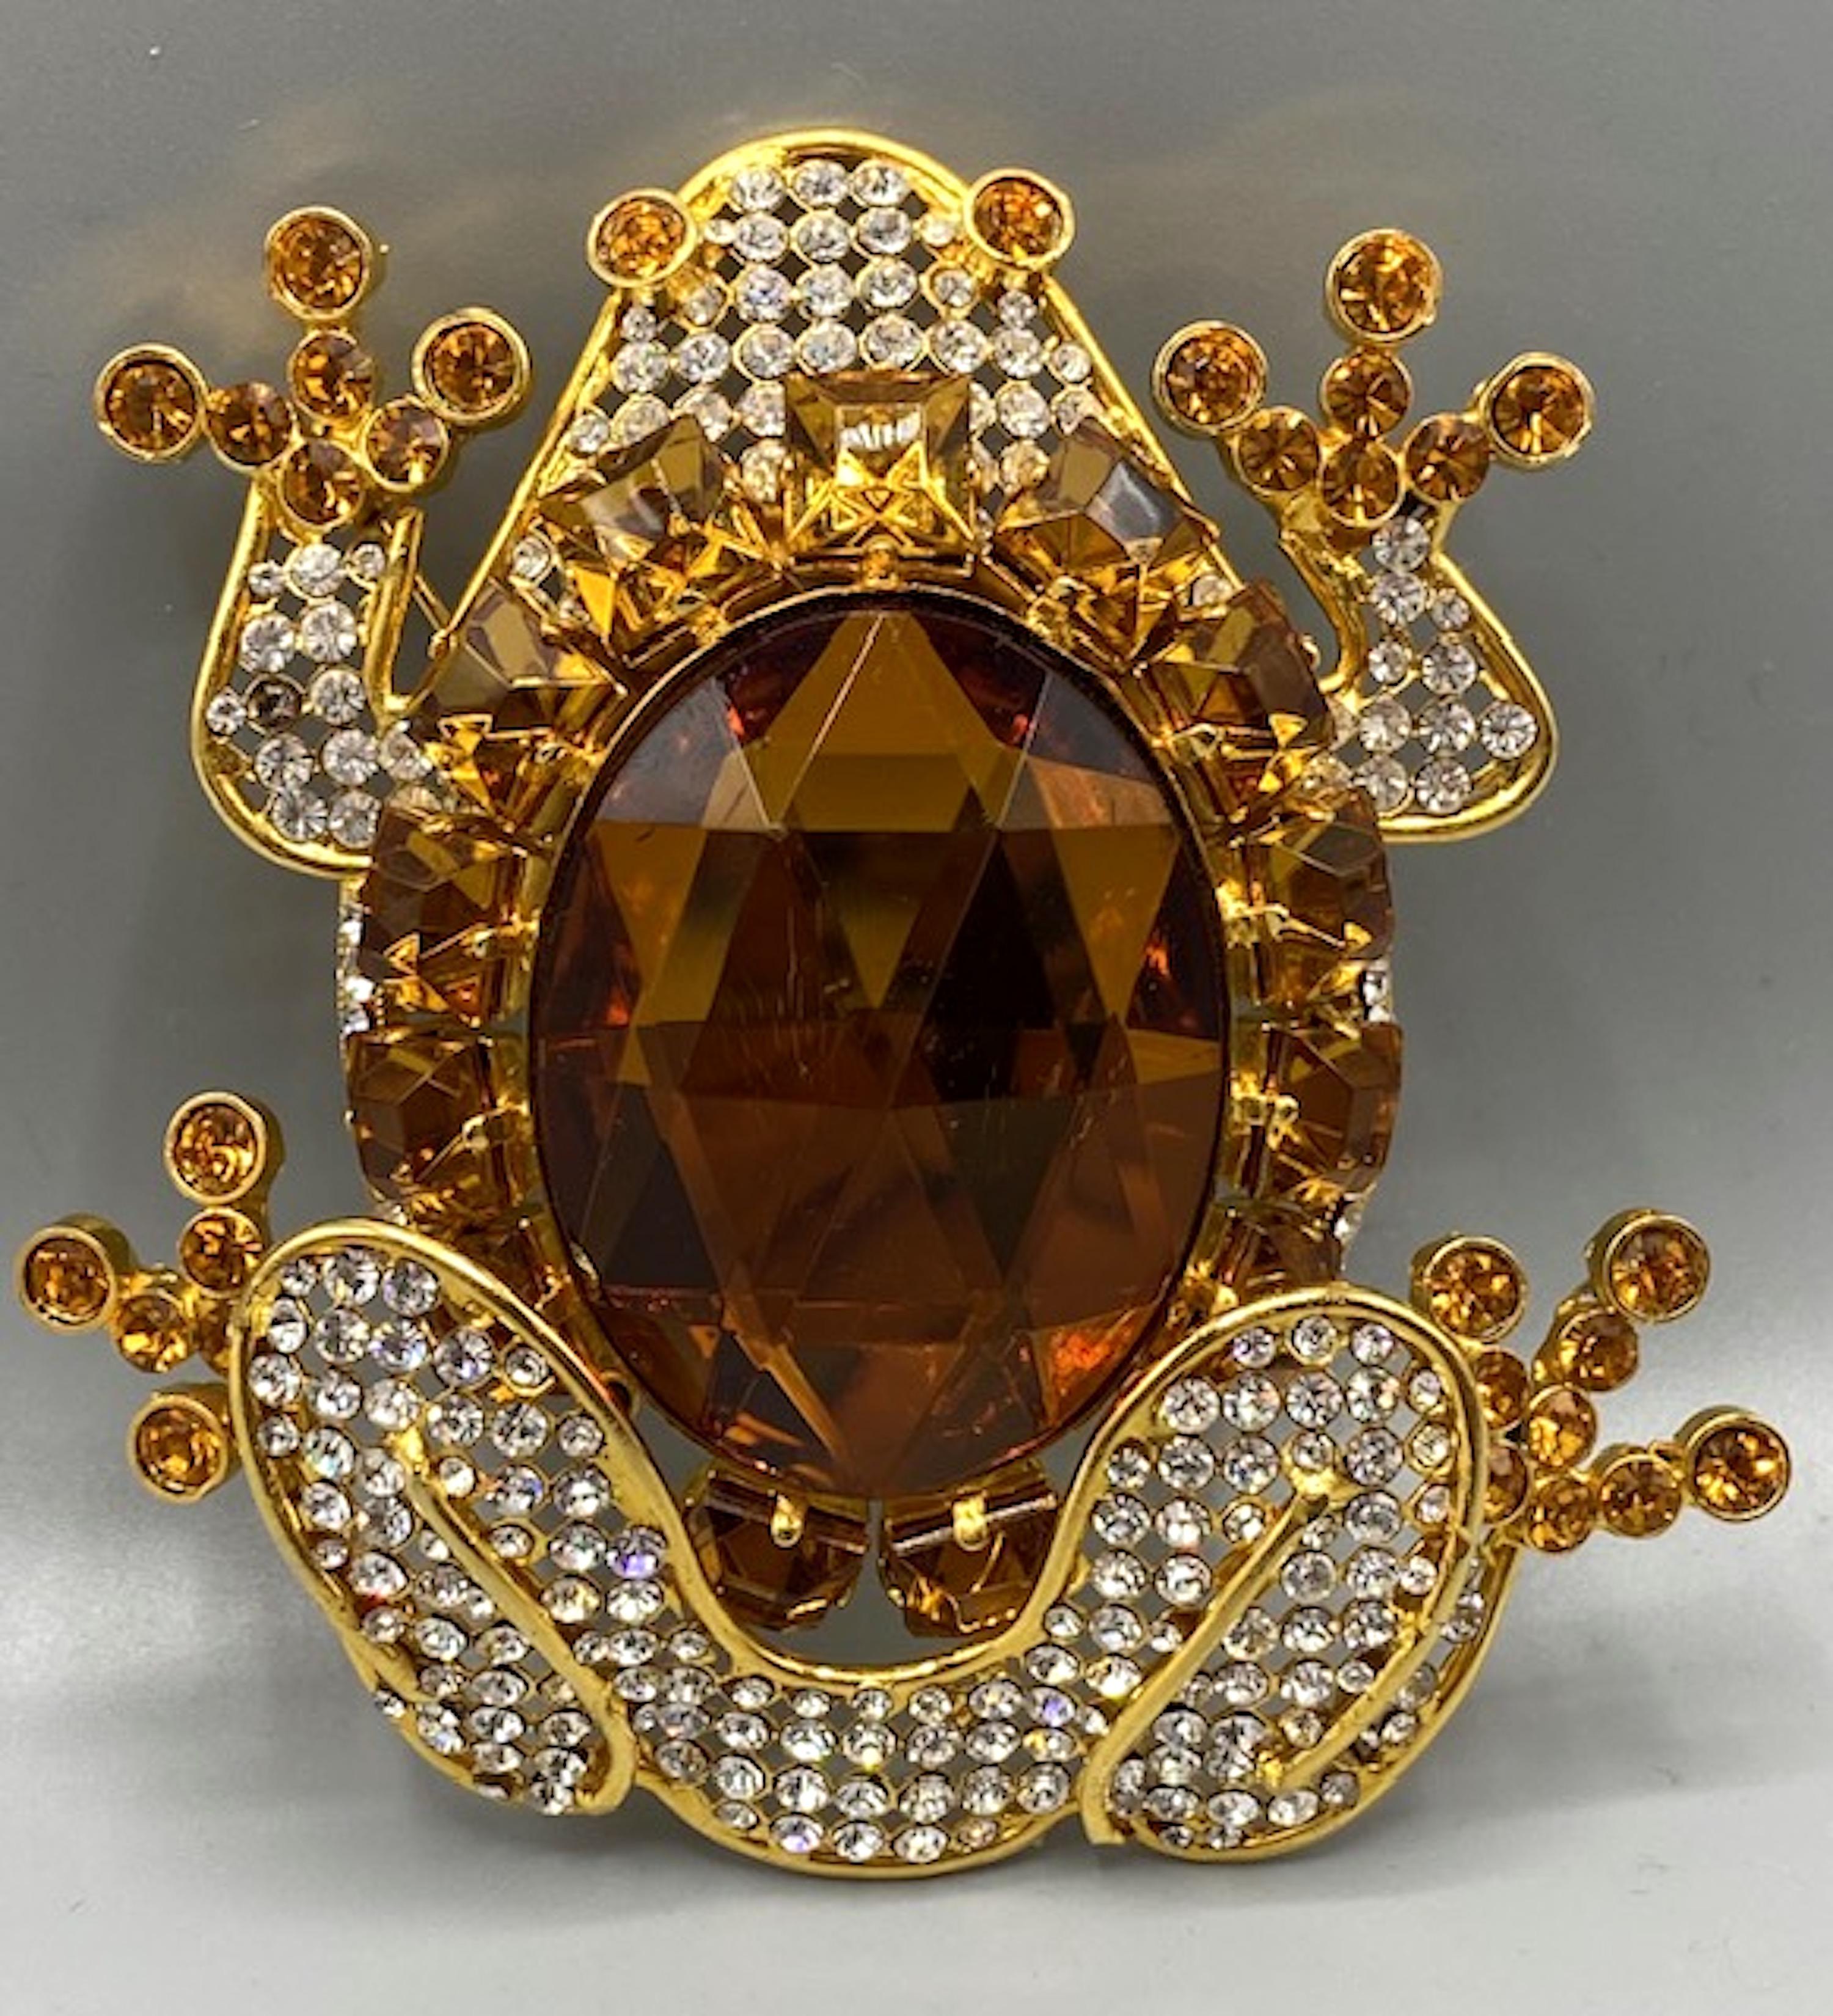 This impressively  large 1980s Valentino Garavani gold-tone frog brooch is particularly glamorous. The piece is encrusted with rhinestones and is centered by a large faceted amber stone that fully embodies the essence of a whimsical crown jewel. 